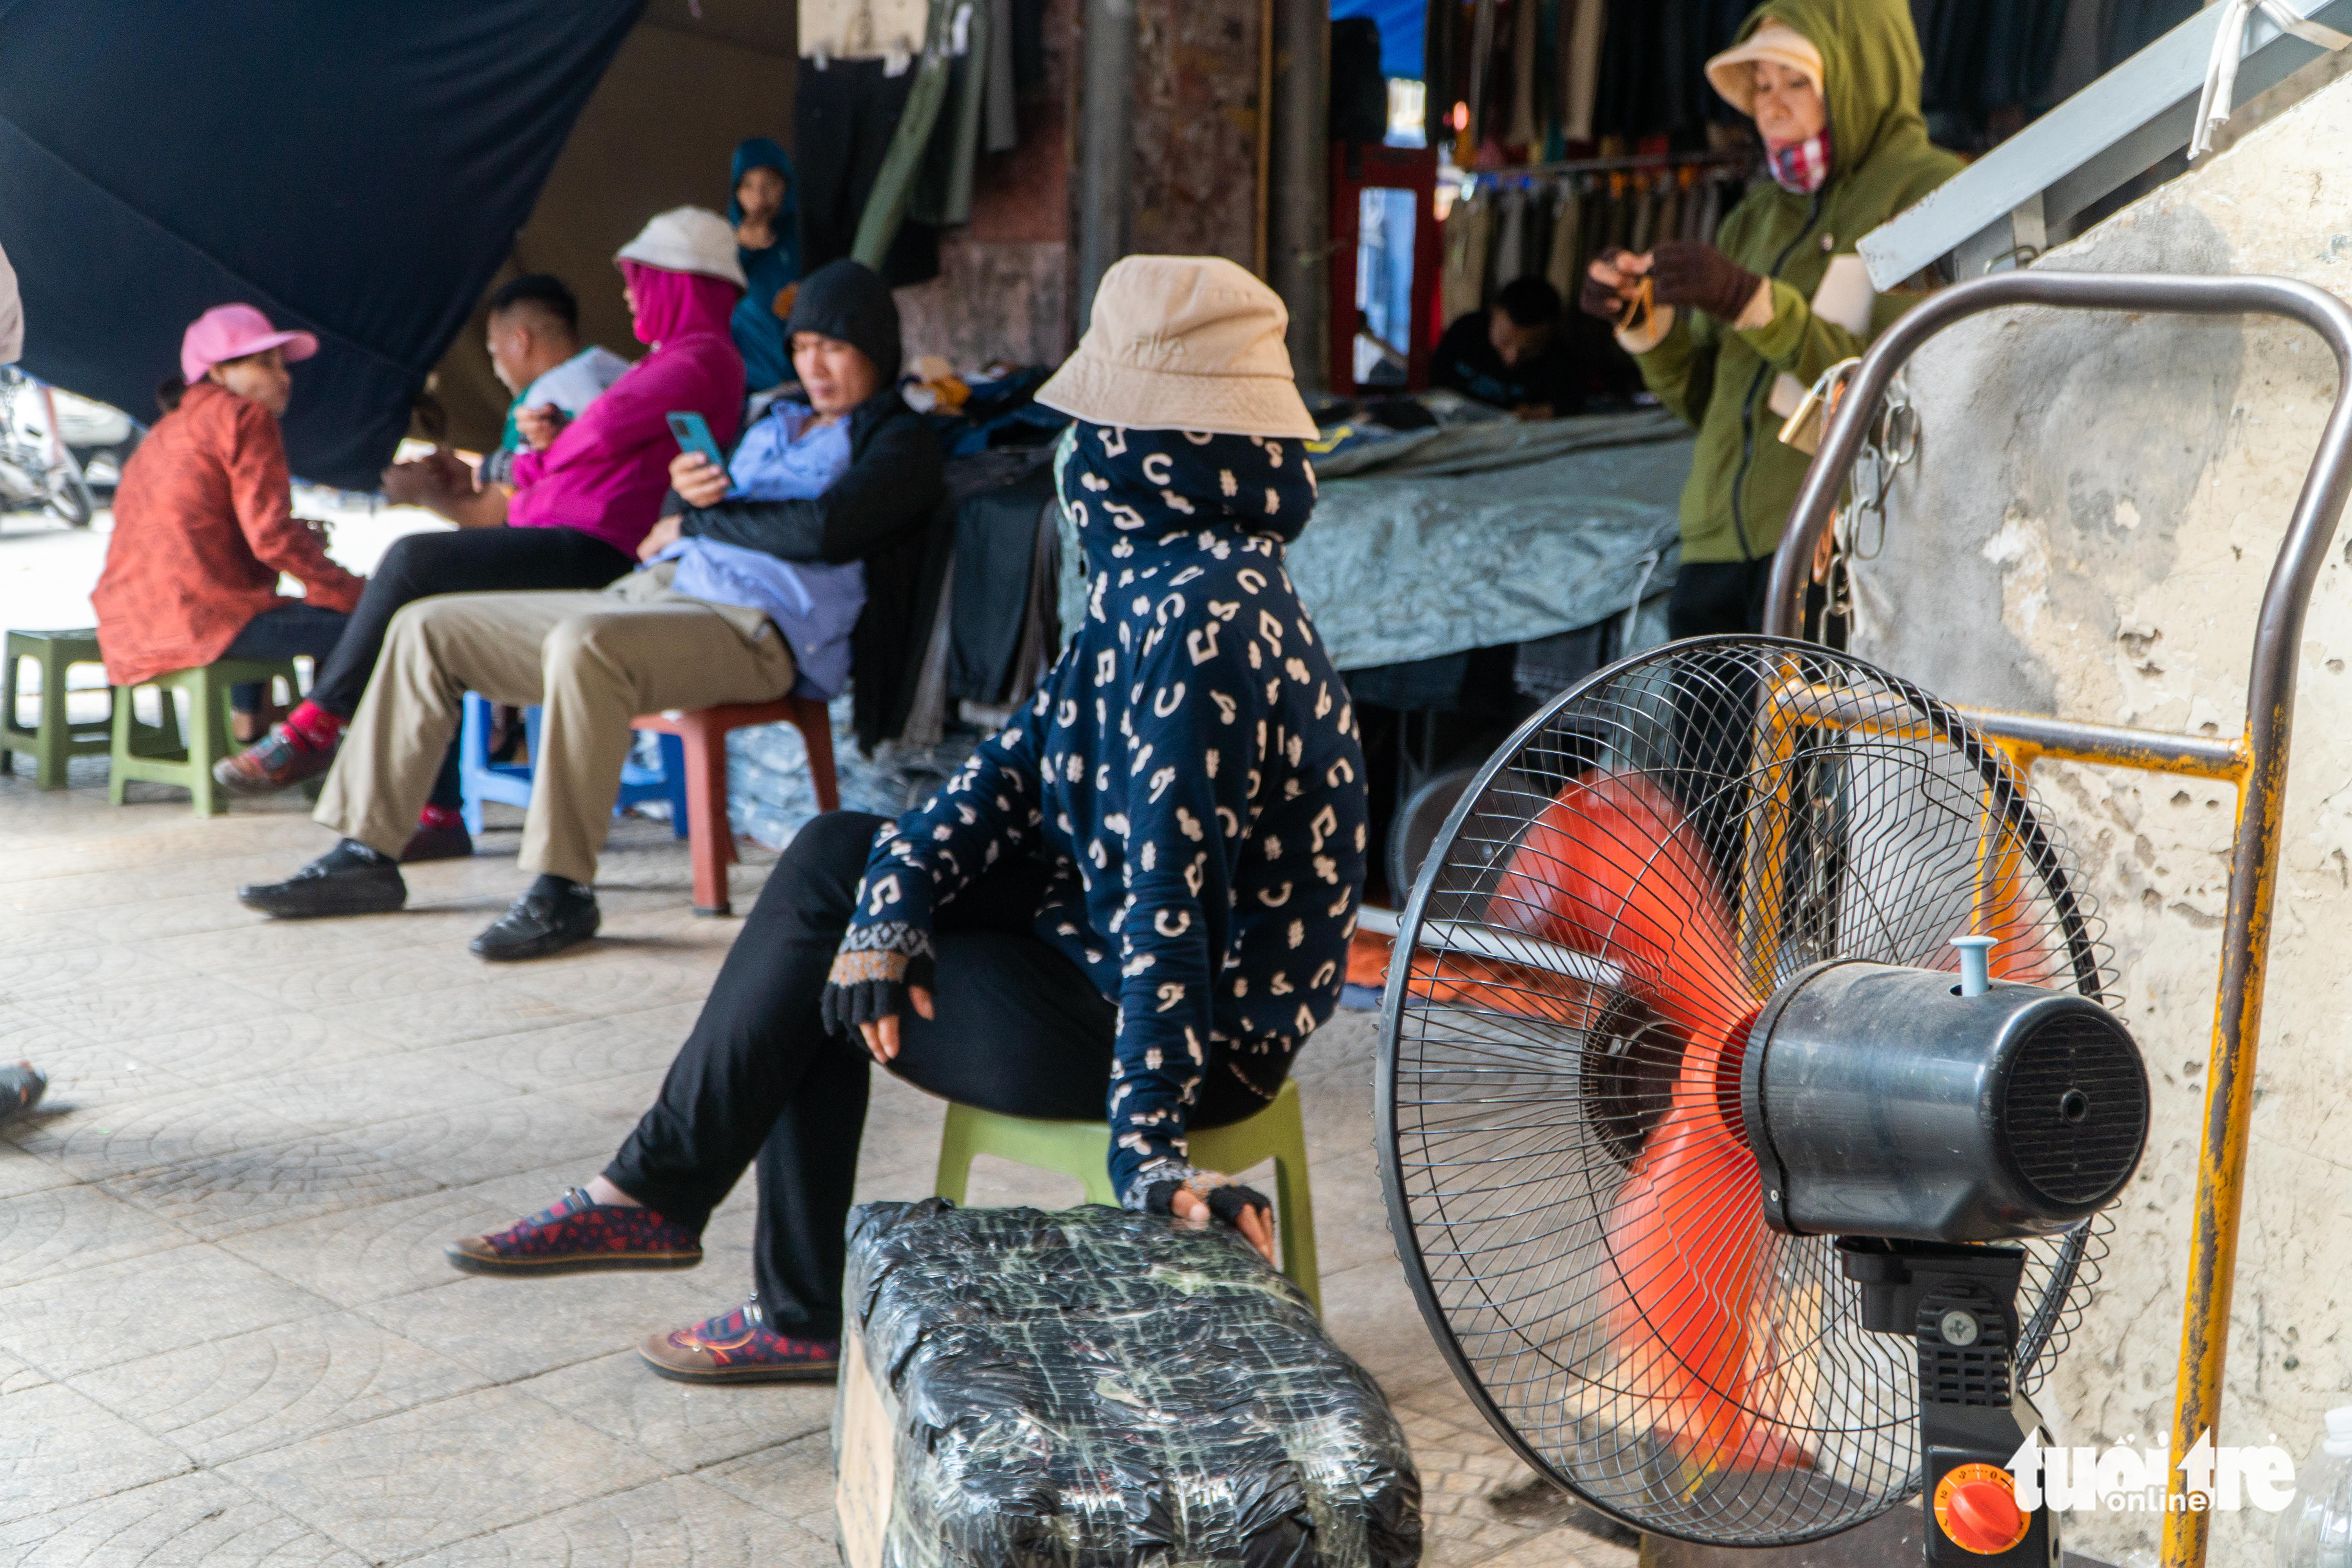 A woman sits in front of an electric fan to cope with the heat in Hanoi, June 21, 2022. Photo: Pham Tuan / Tuoi Tre